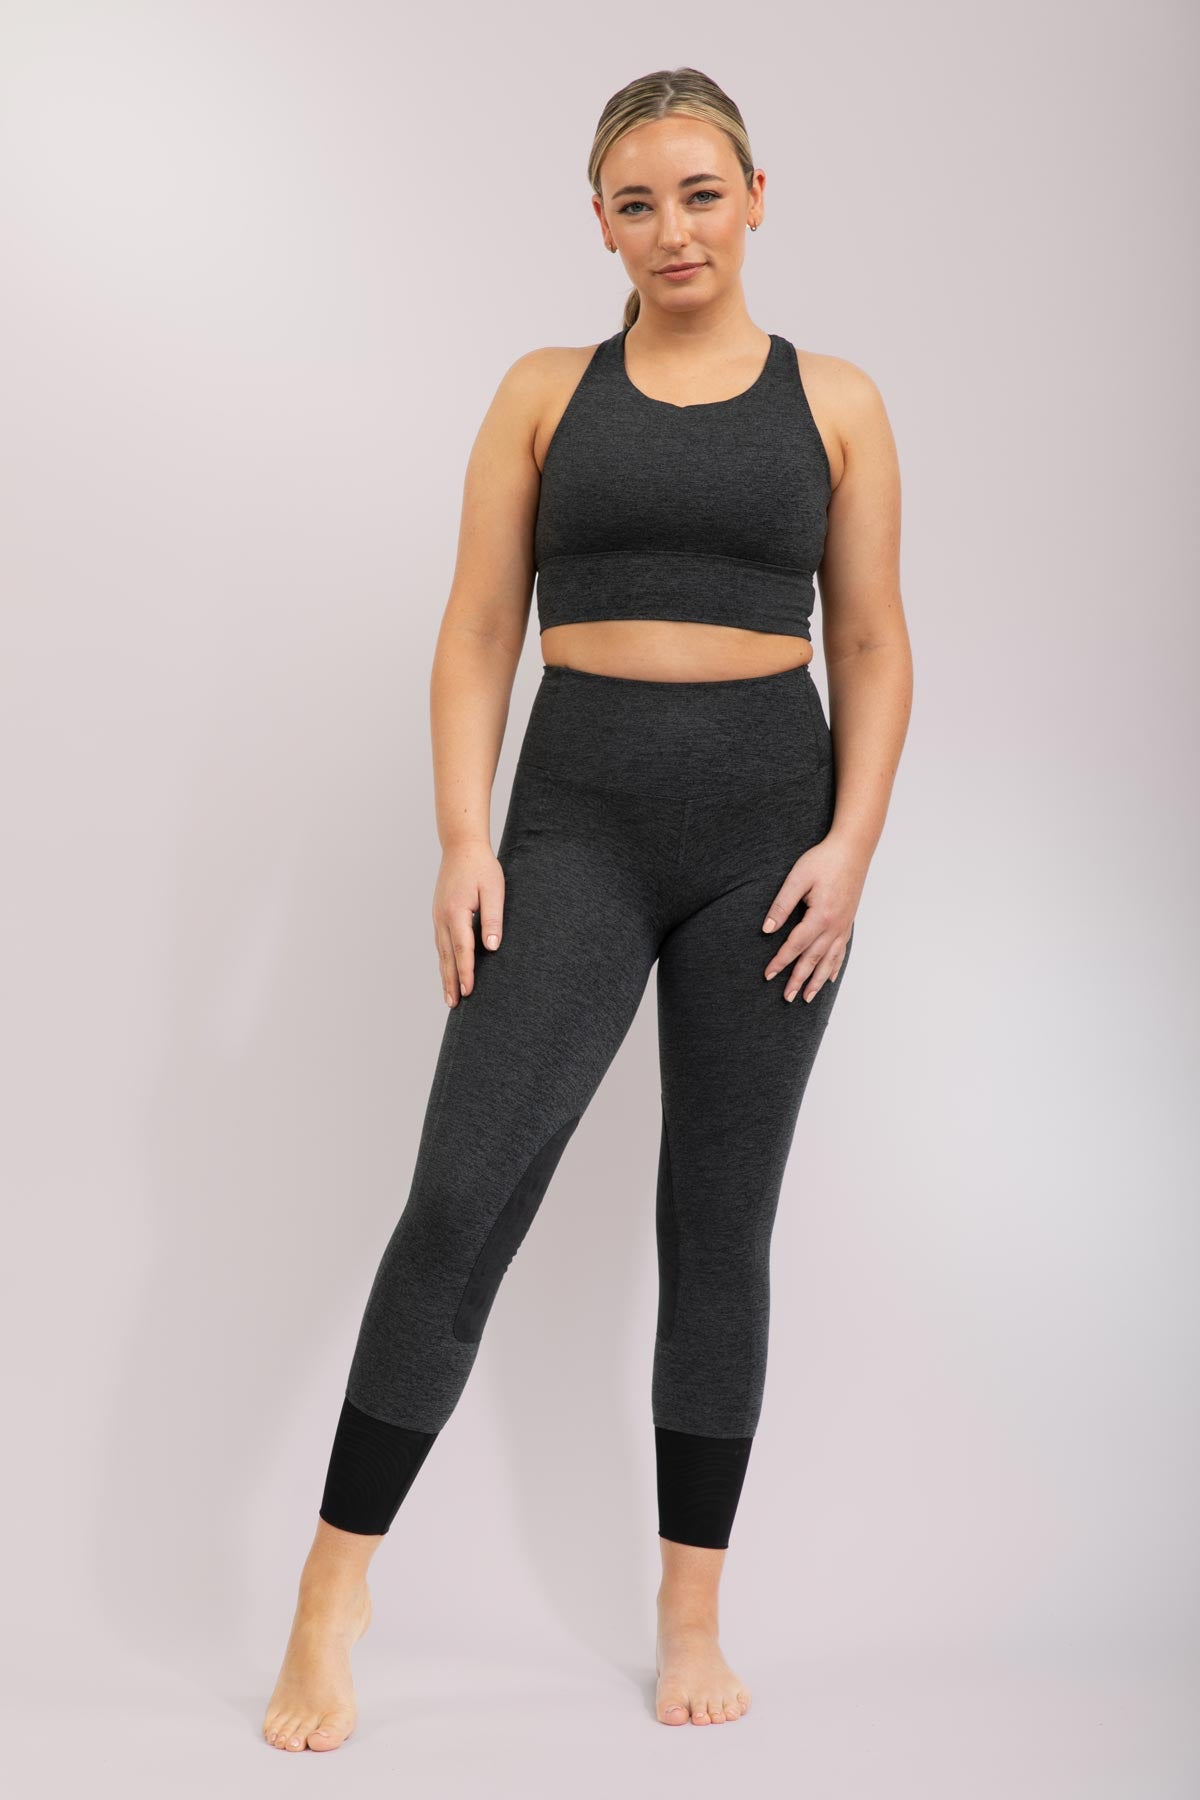 High Waist Thick Leggings With Fur Inside For Women in Nepal - Buy Training  Tights & Leggings at Best Price at